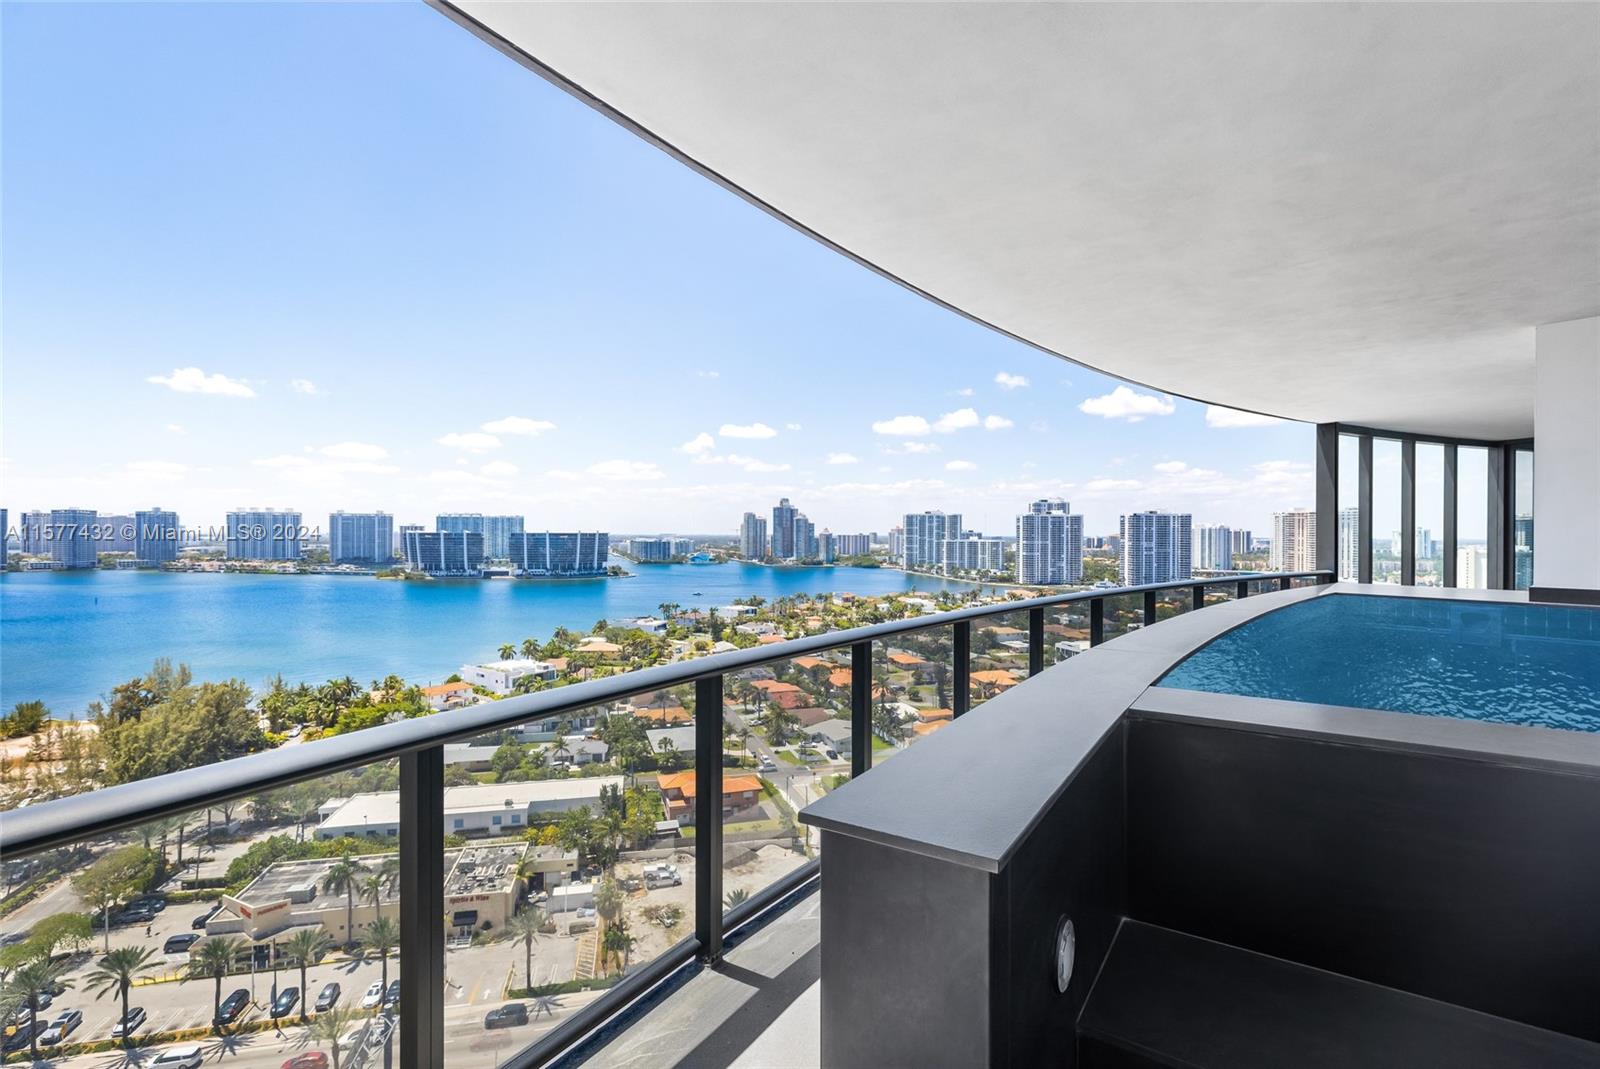 Property for Sale at 18555 Collins Ave 1903, Sunny Isles Beach, Miami-Dade County, Florida - Bedrooms: 4 
Bathrooms: 5  - $3,650,000